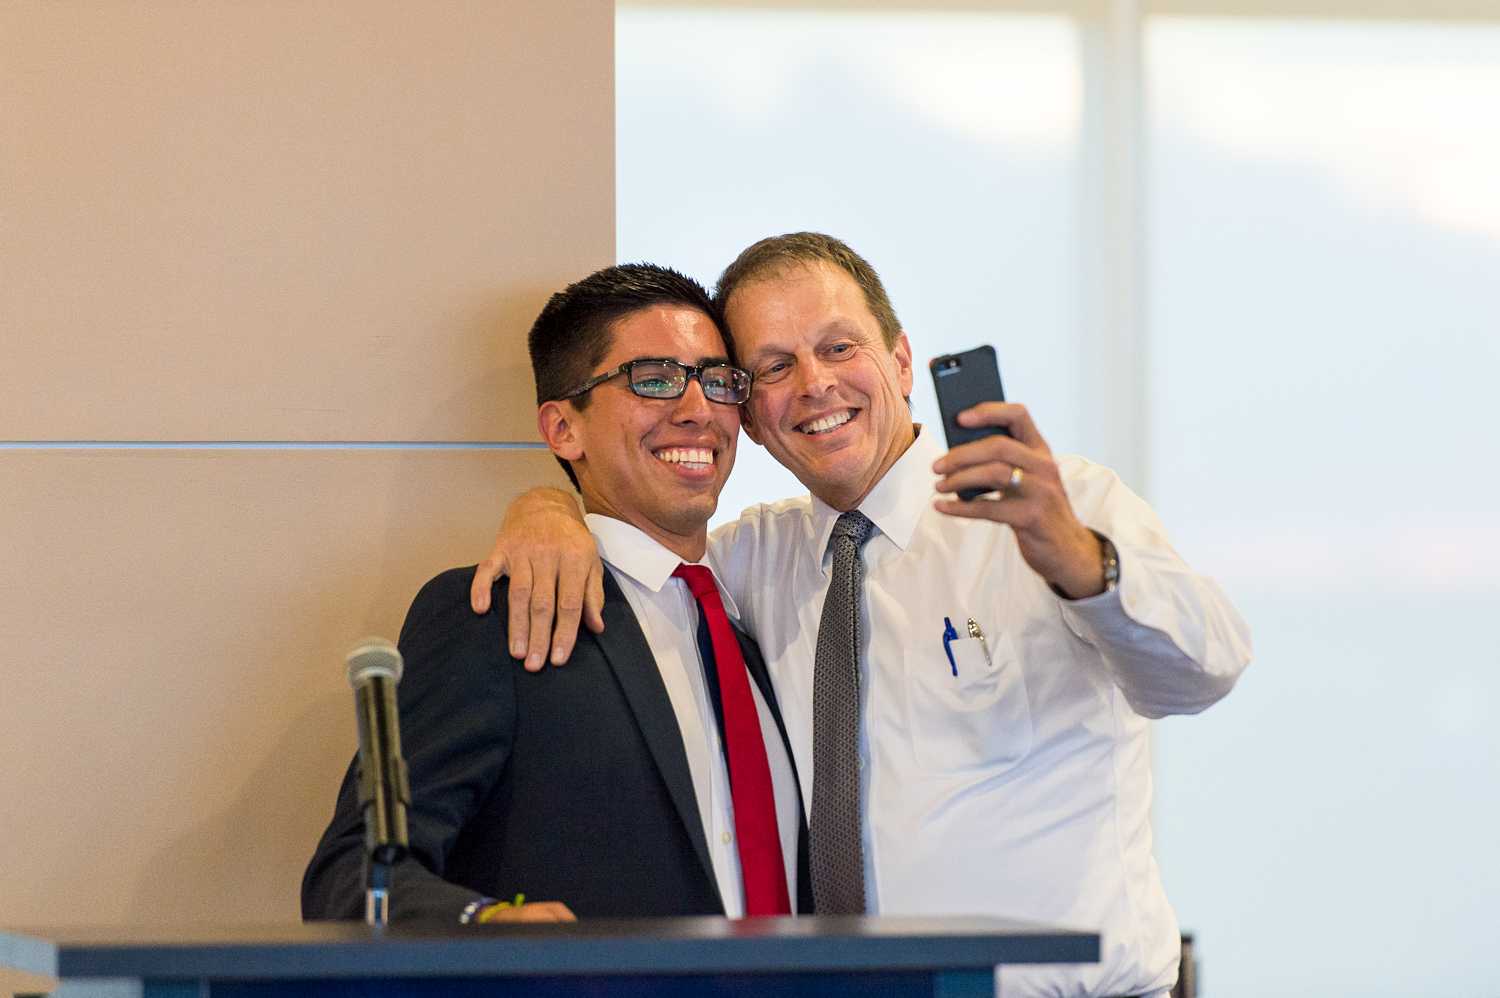 President Kelly takes a moment, and a selfie, with Cepeda. Max Jackson | Photo Editor